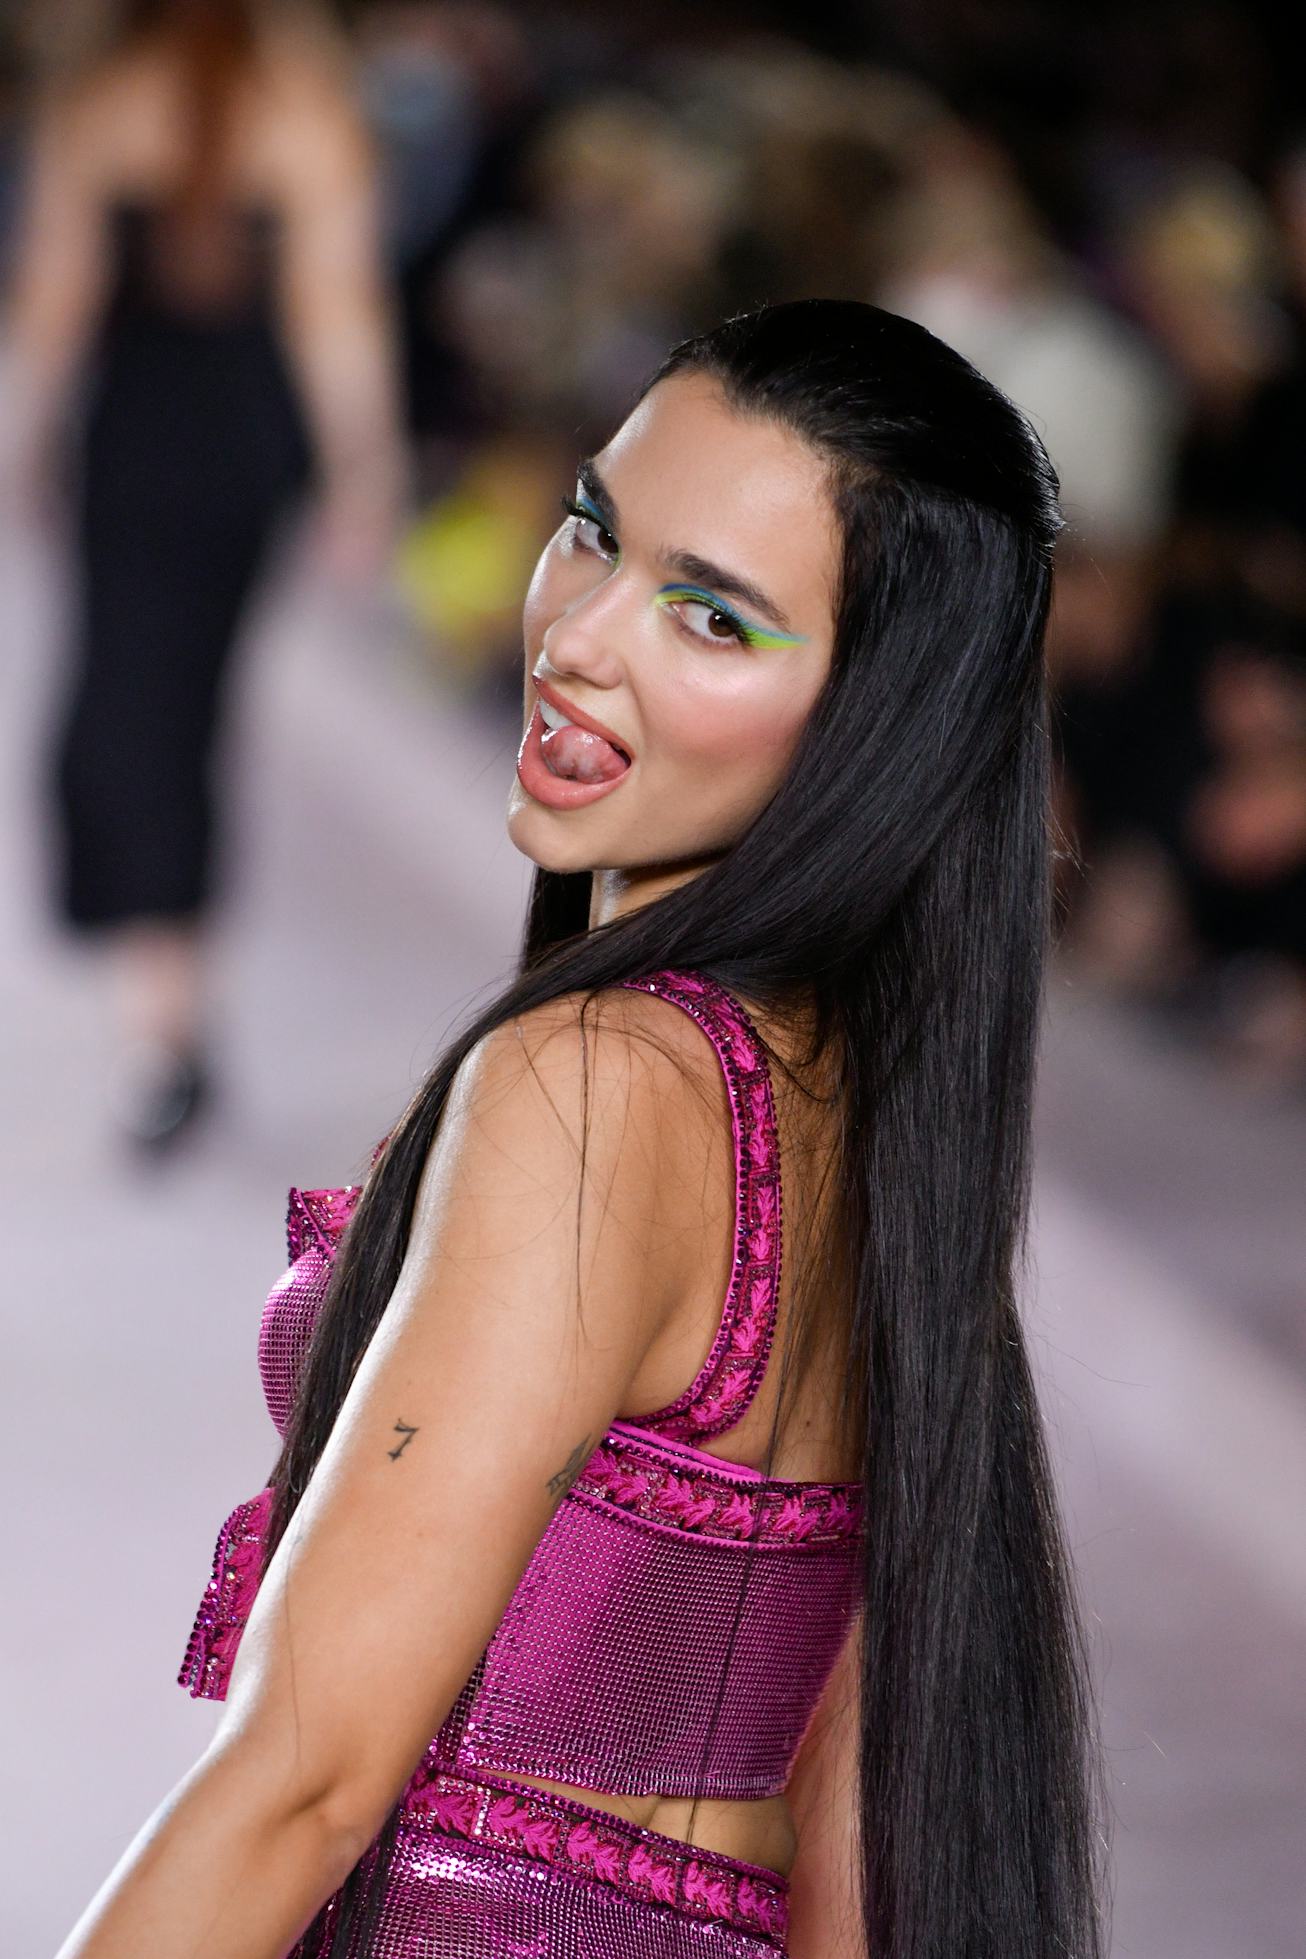 10 Neon Eyeshadows That Will Light Up Your Look